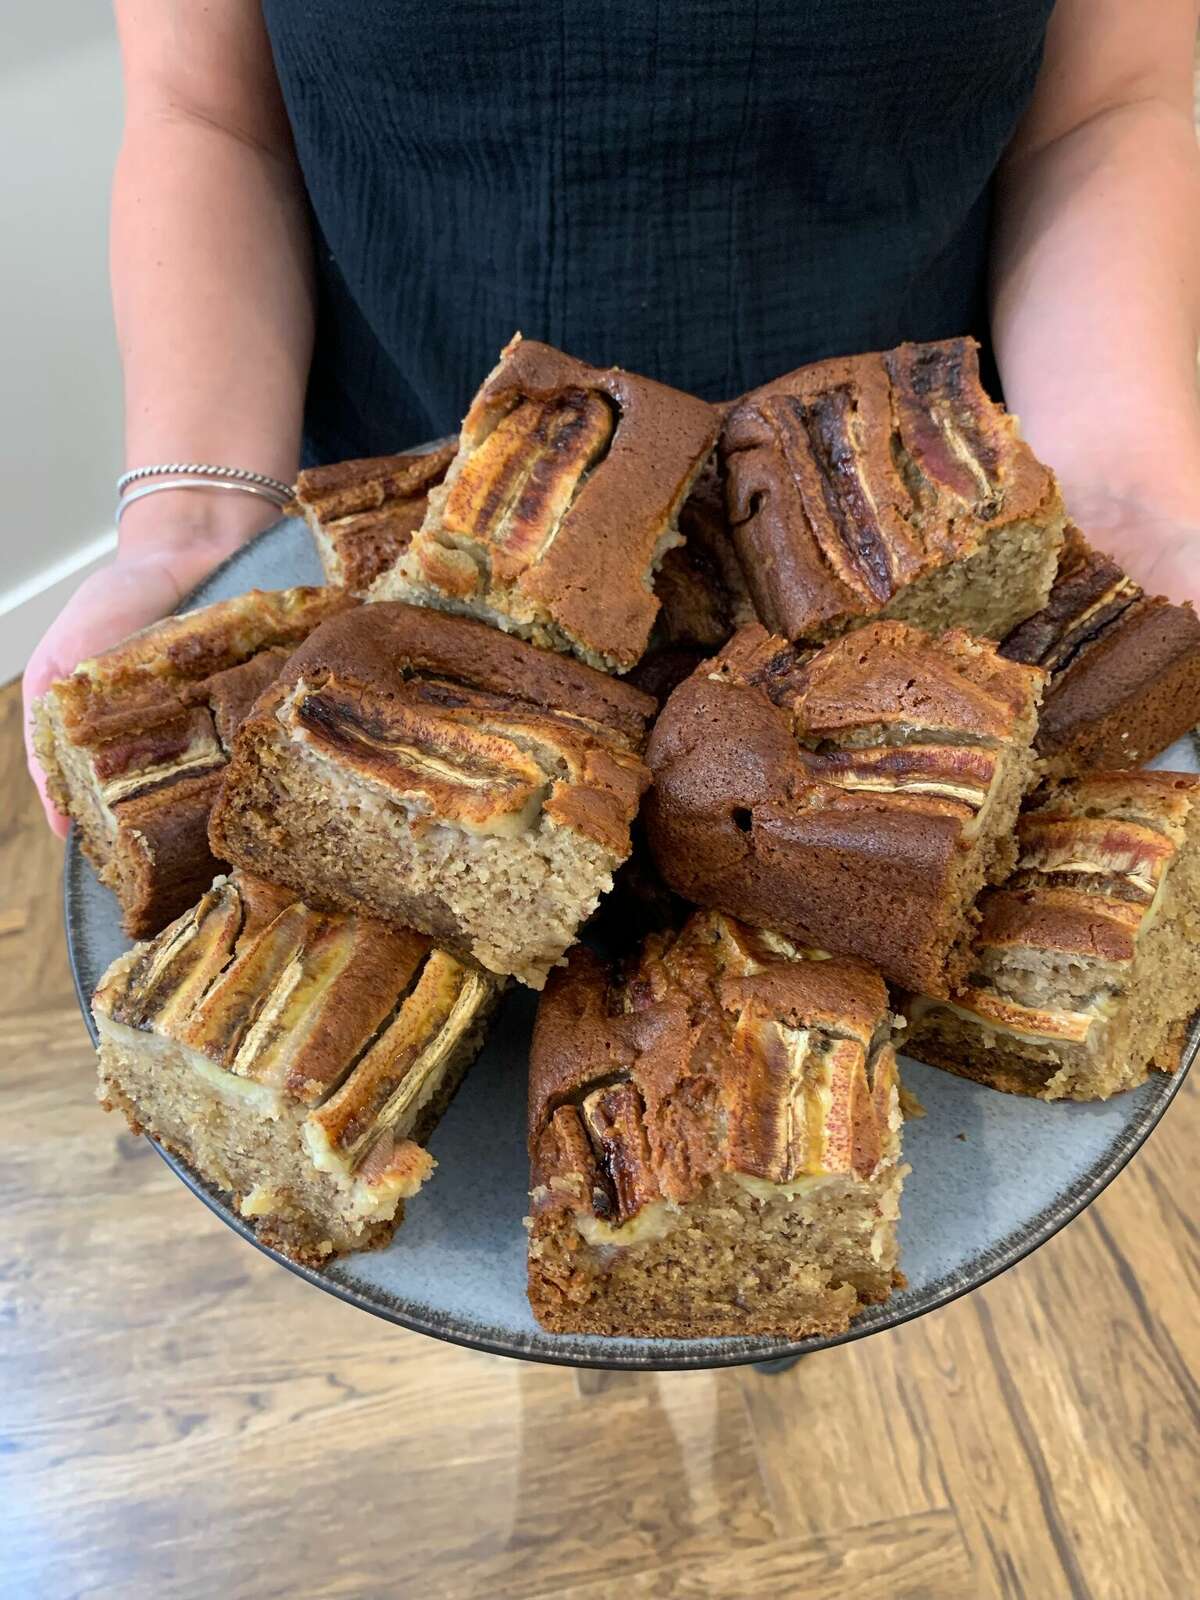 A platter of banana bread at Bloom Bake Shop in Hartford, which recently opened a storefront on Pratt Street.